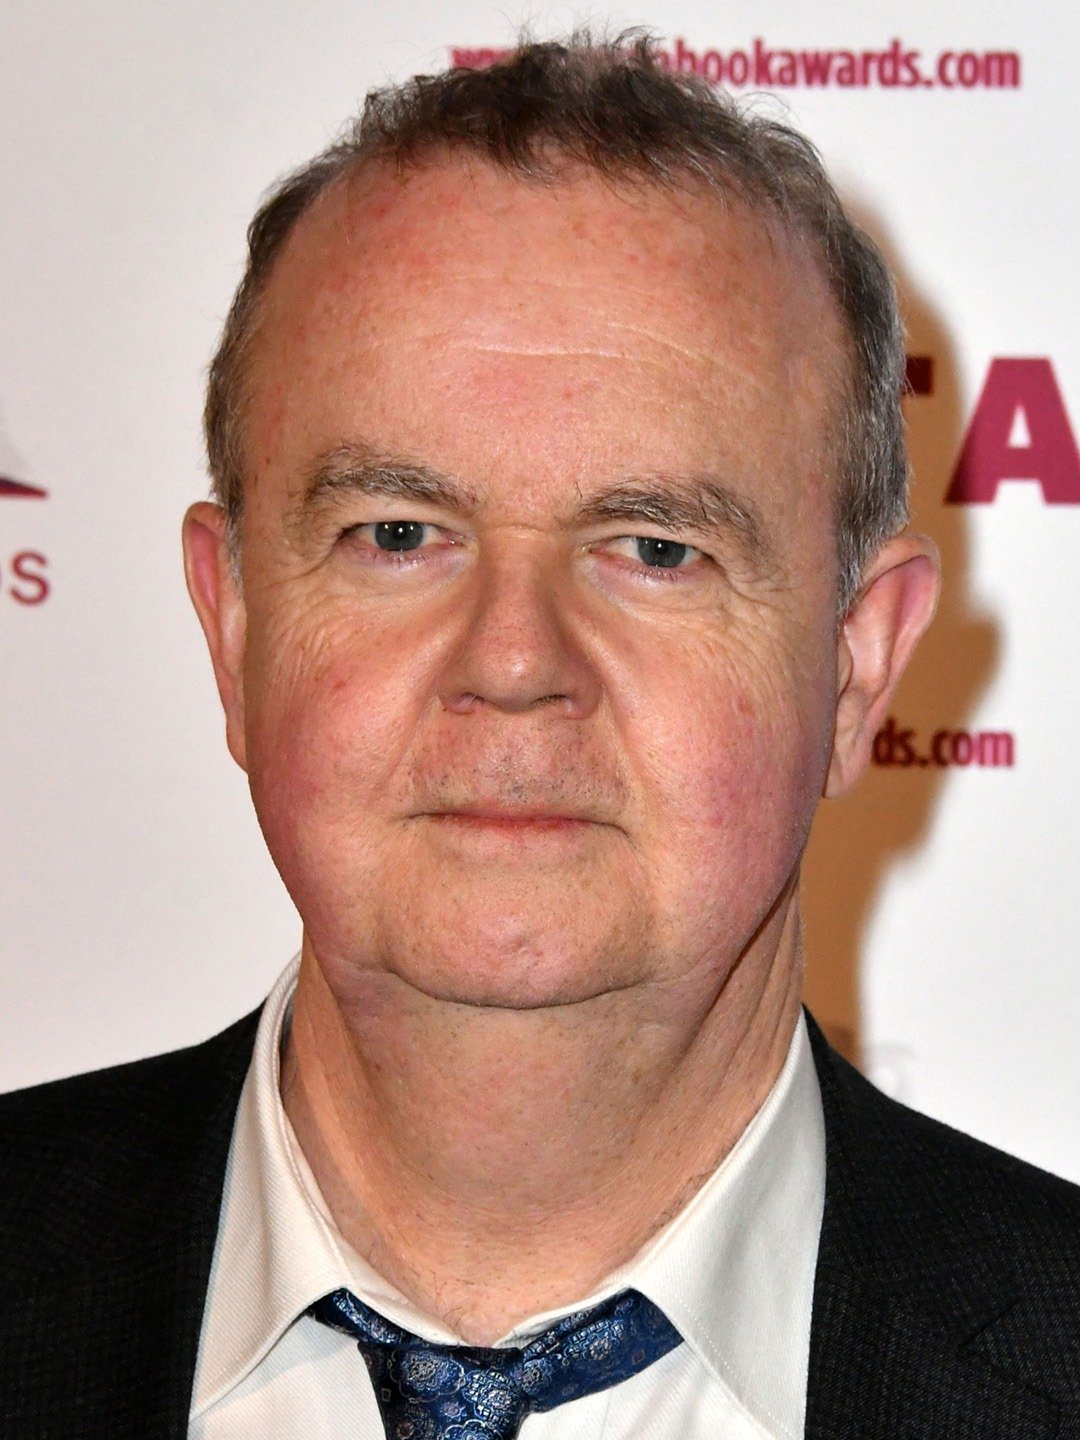 How tall is Ian Hislop?